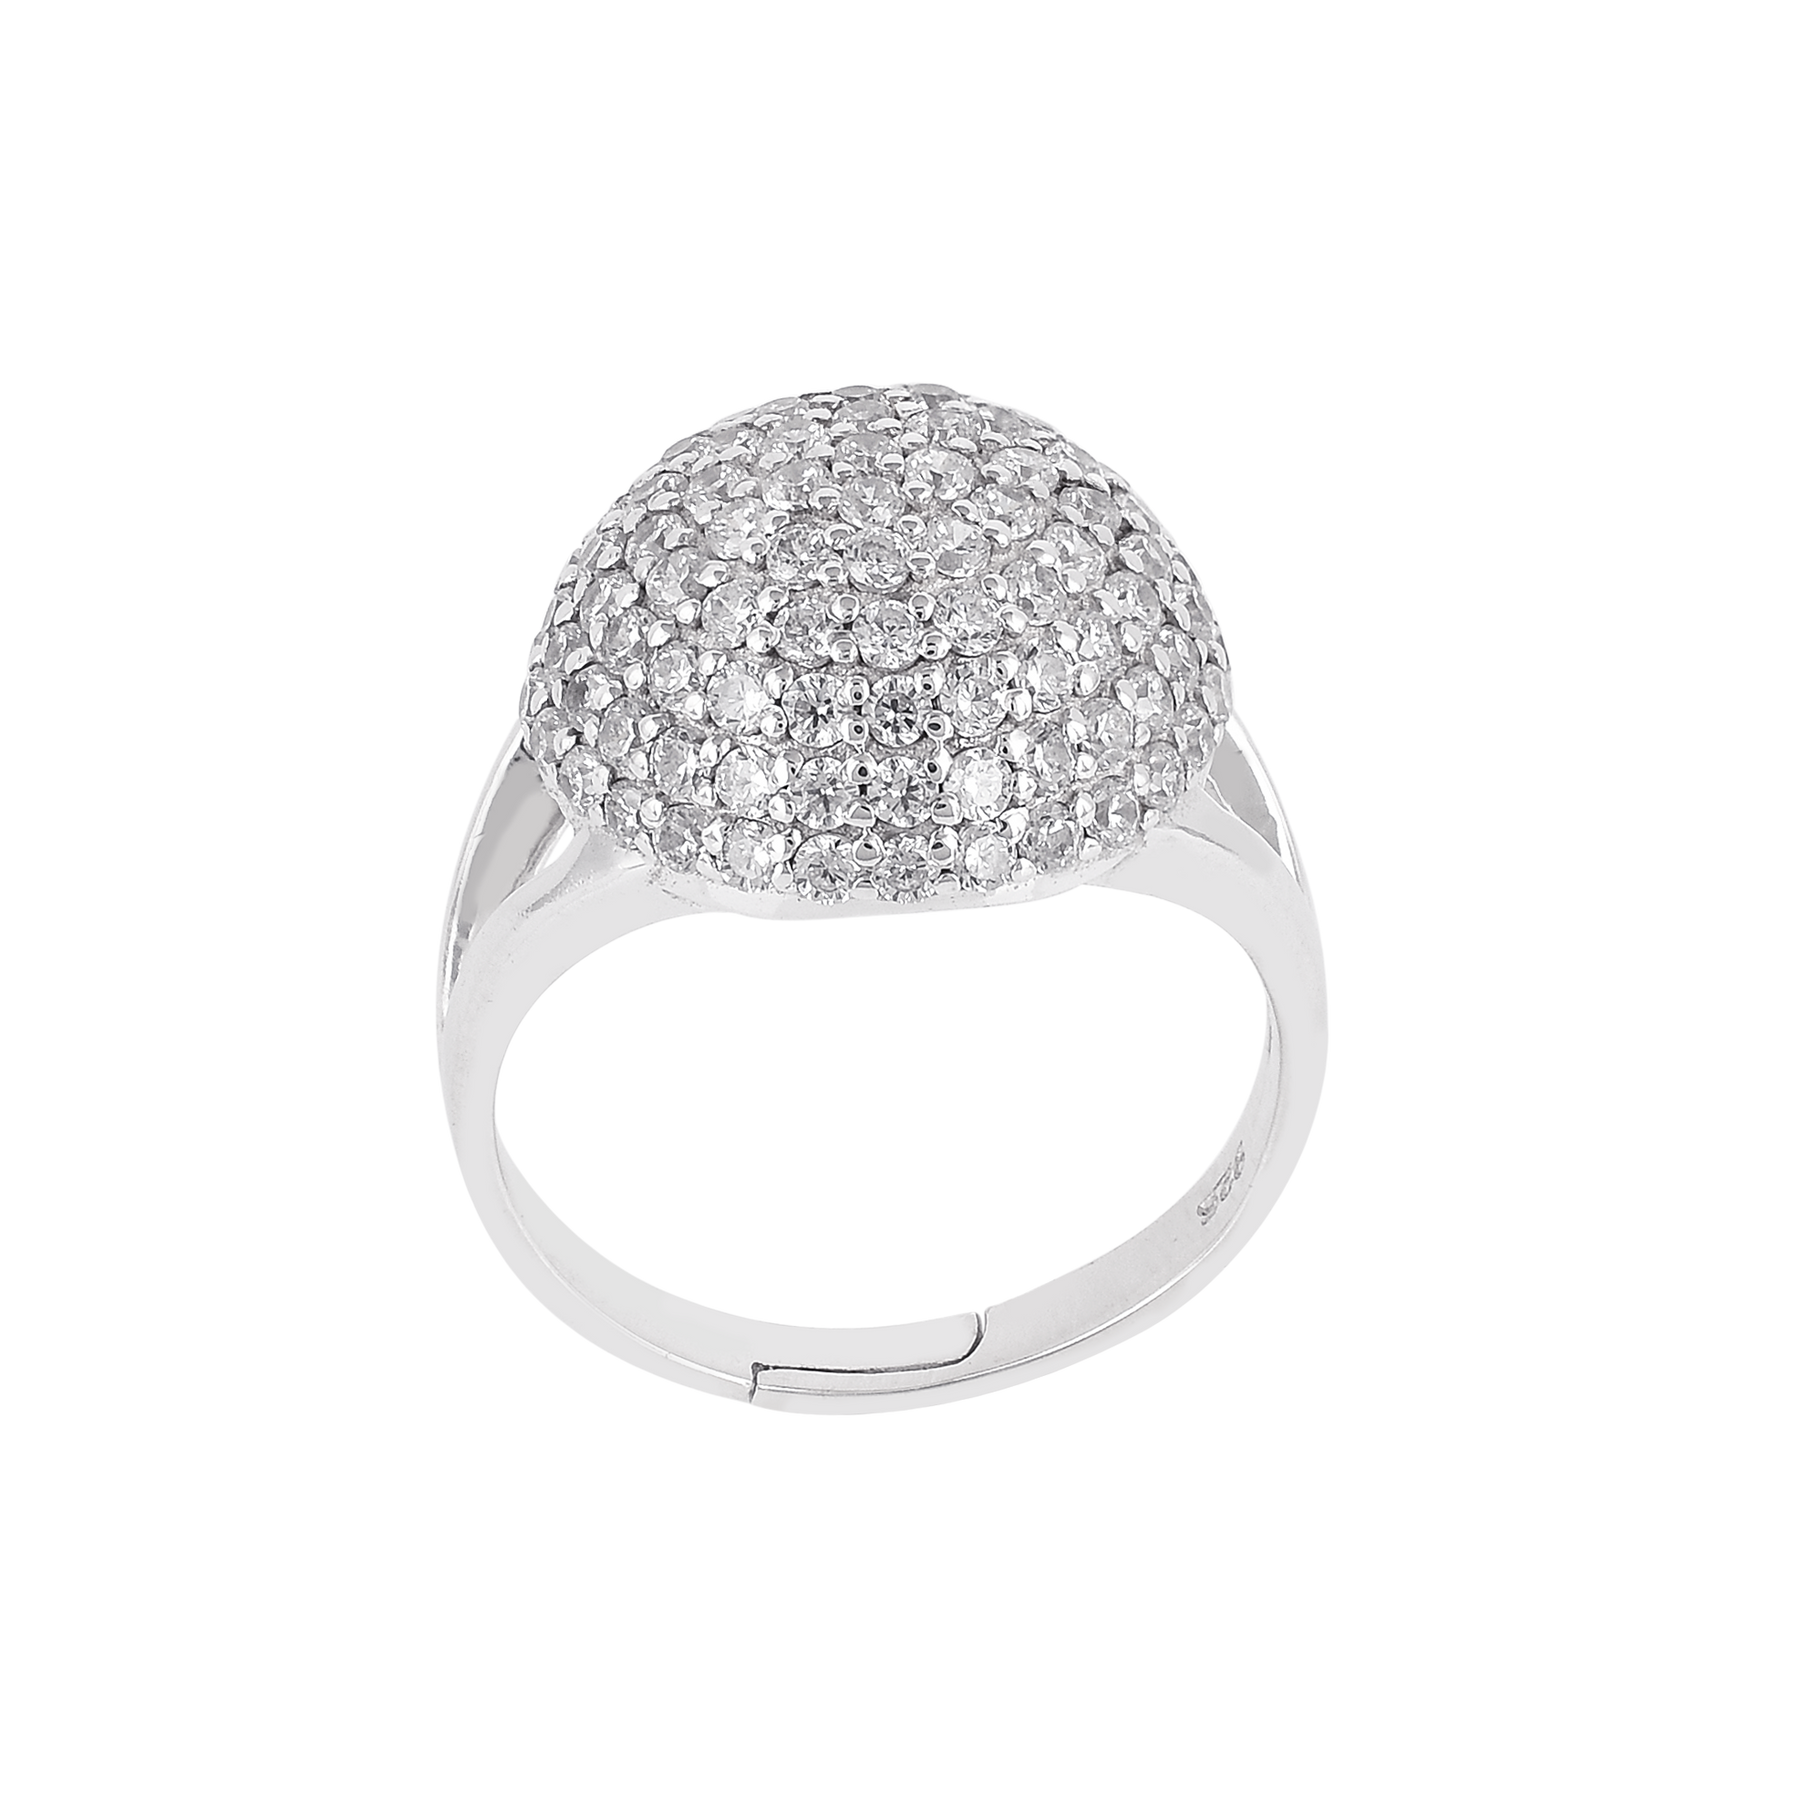 925 Sterling Silver Zircon Dome Ring